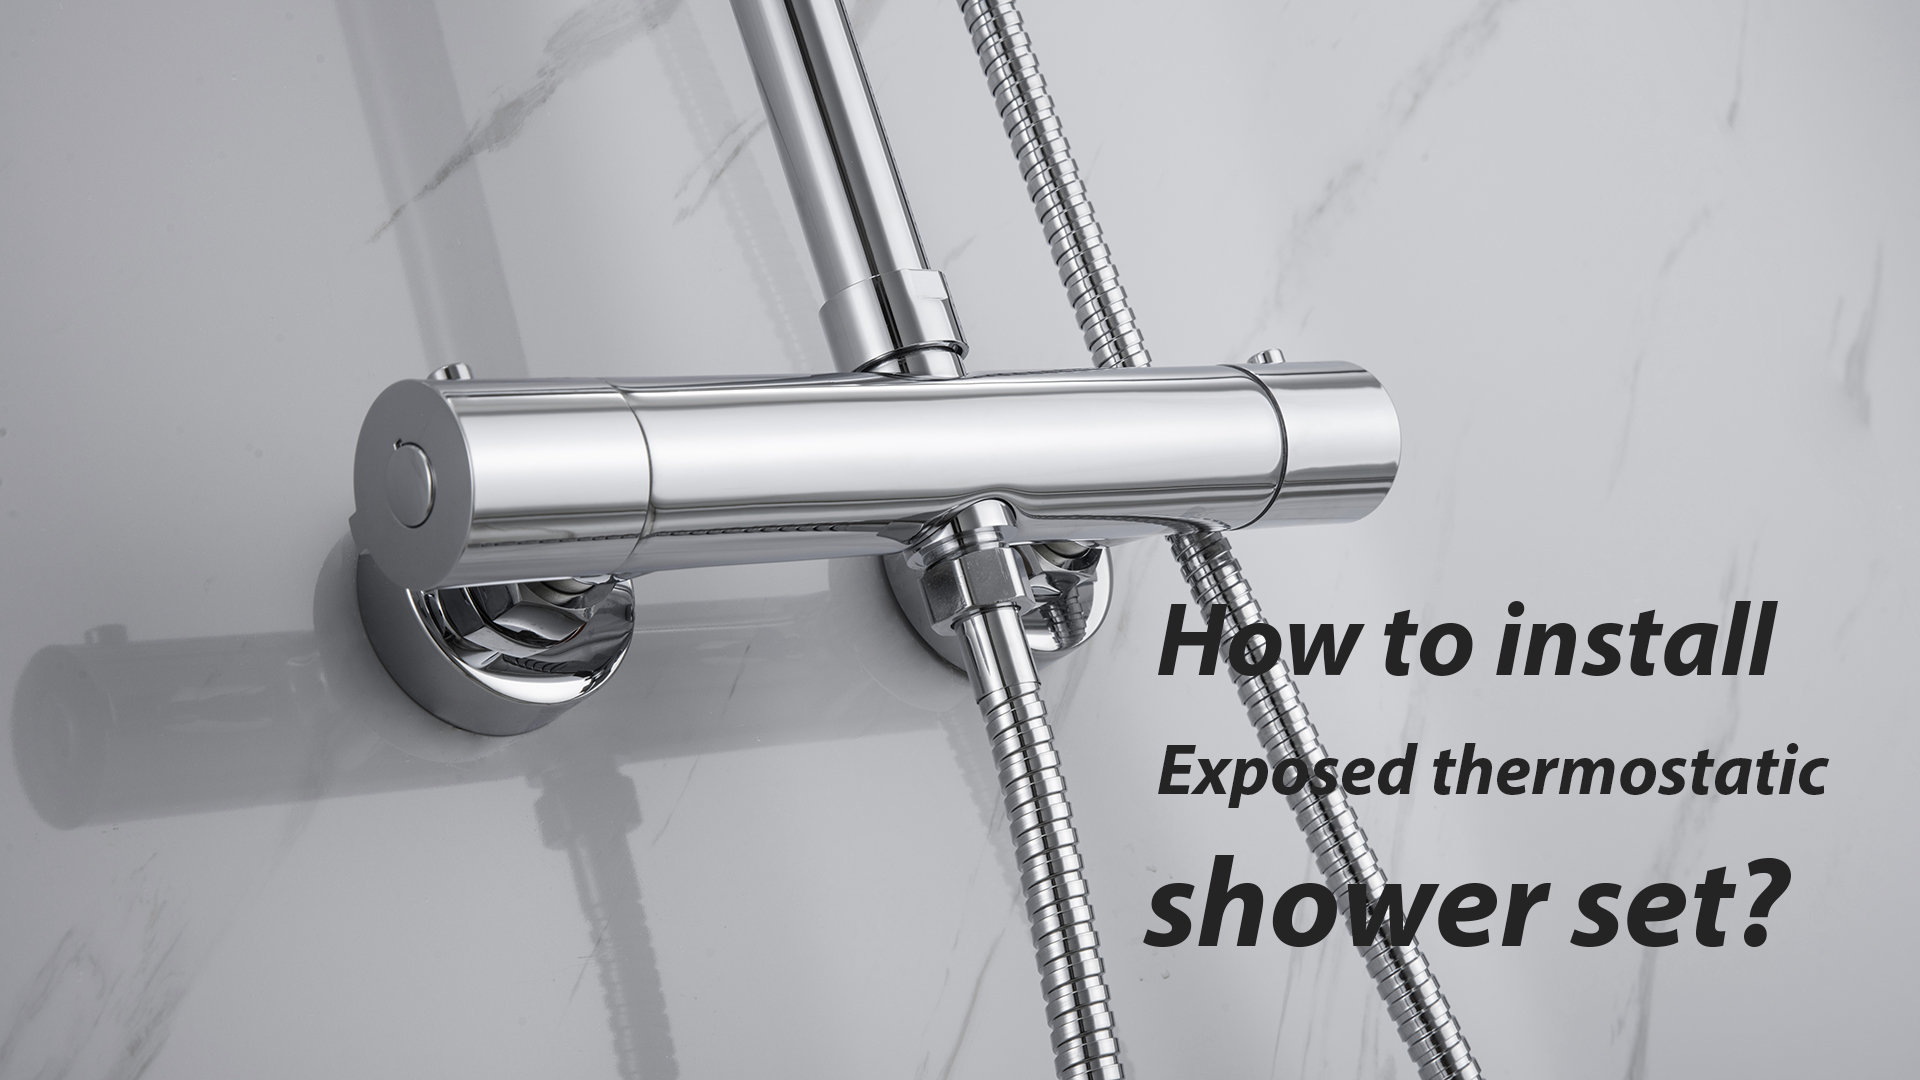 how to install exposed thermostatic shower - youtube cover.jpg